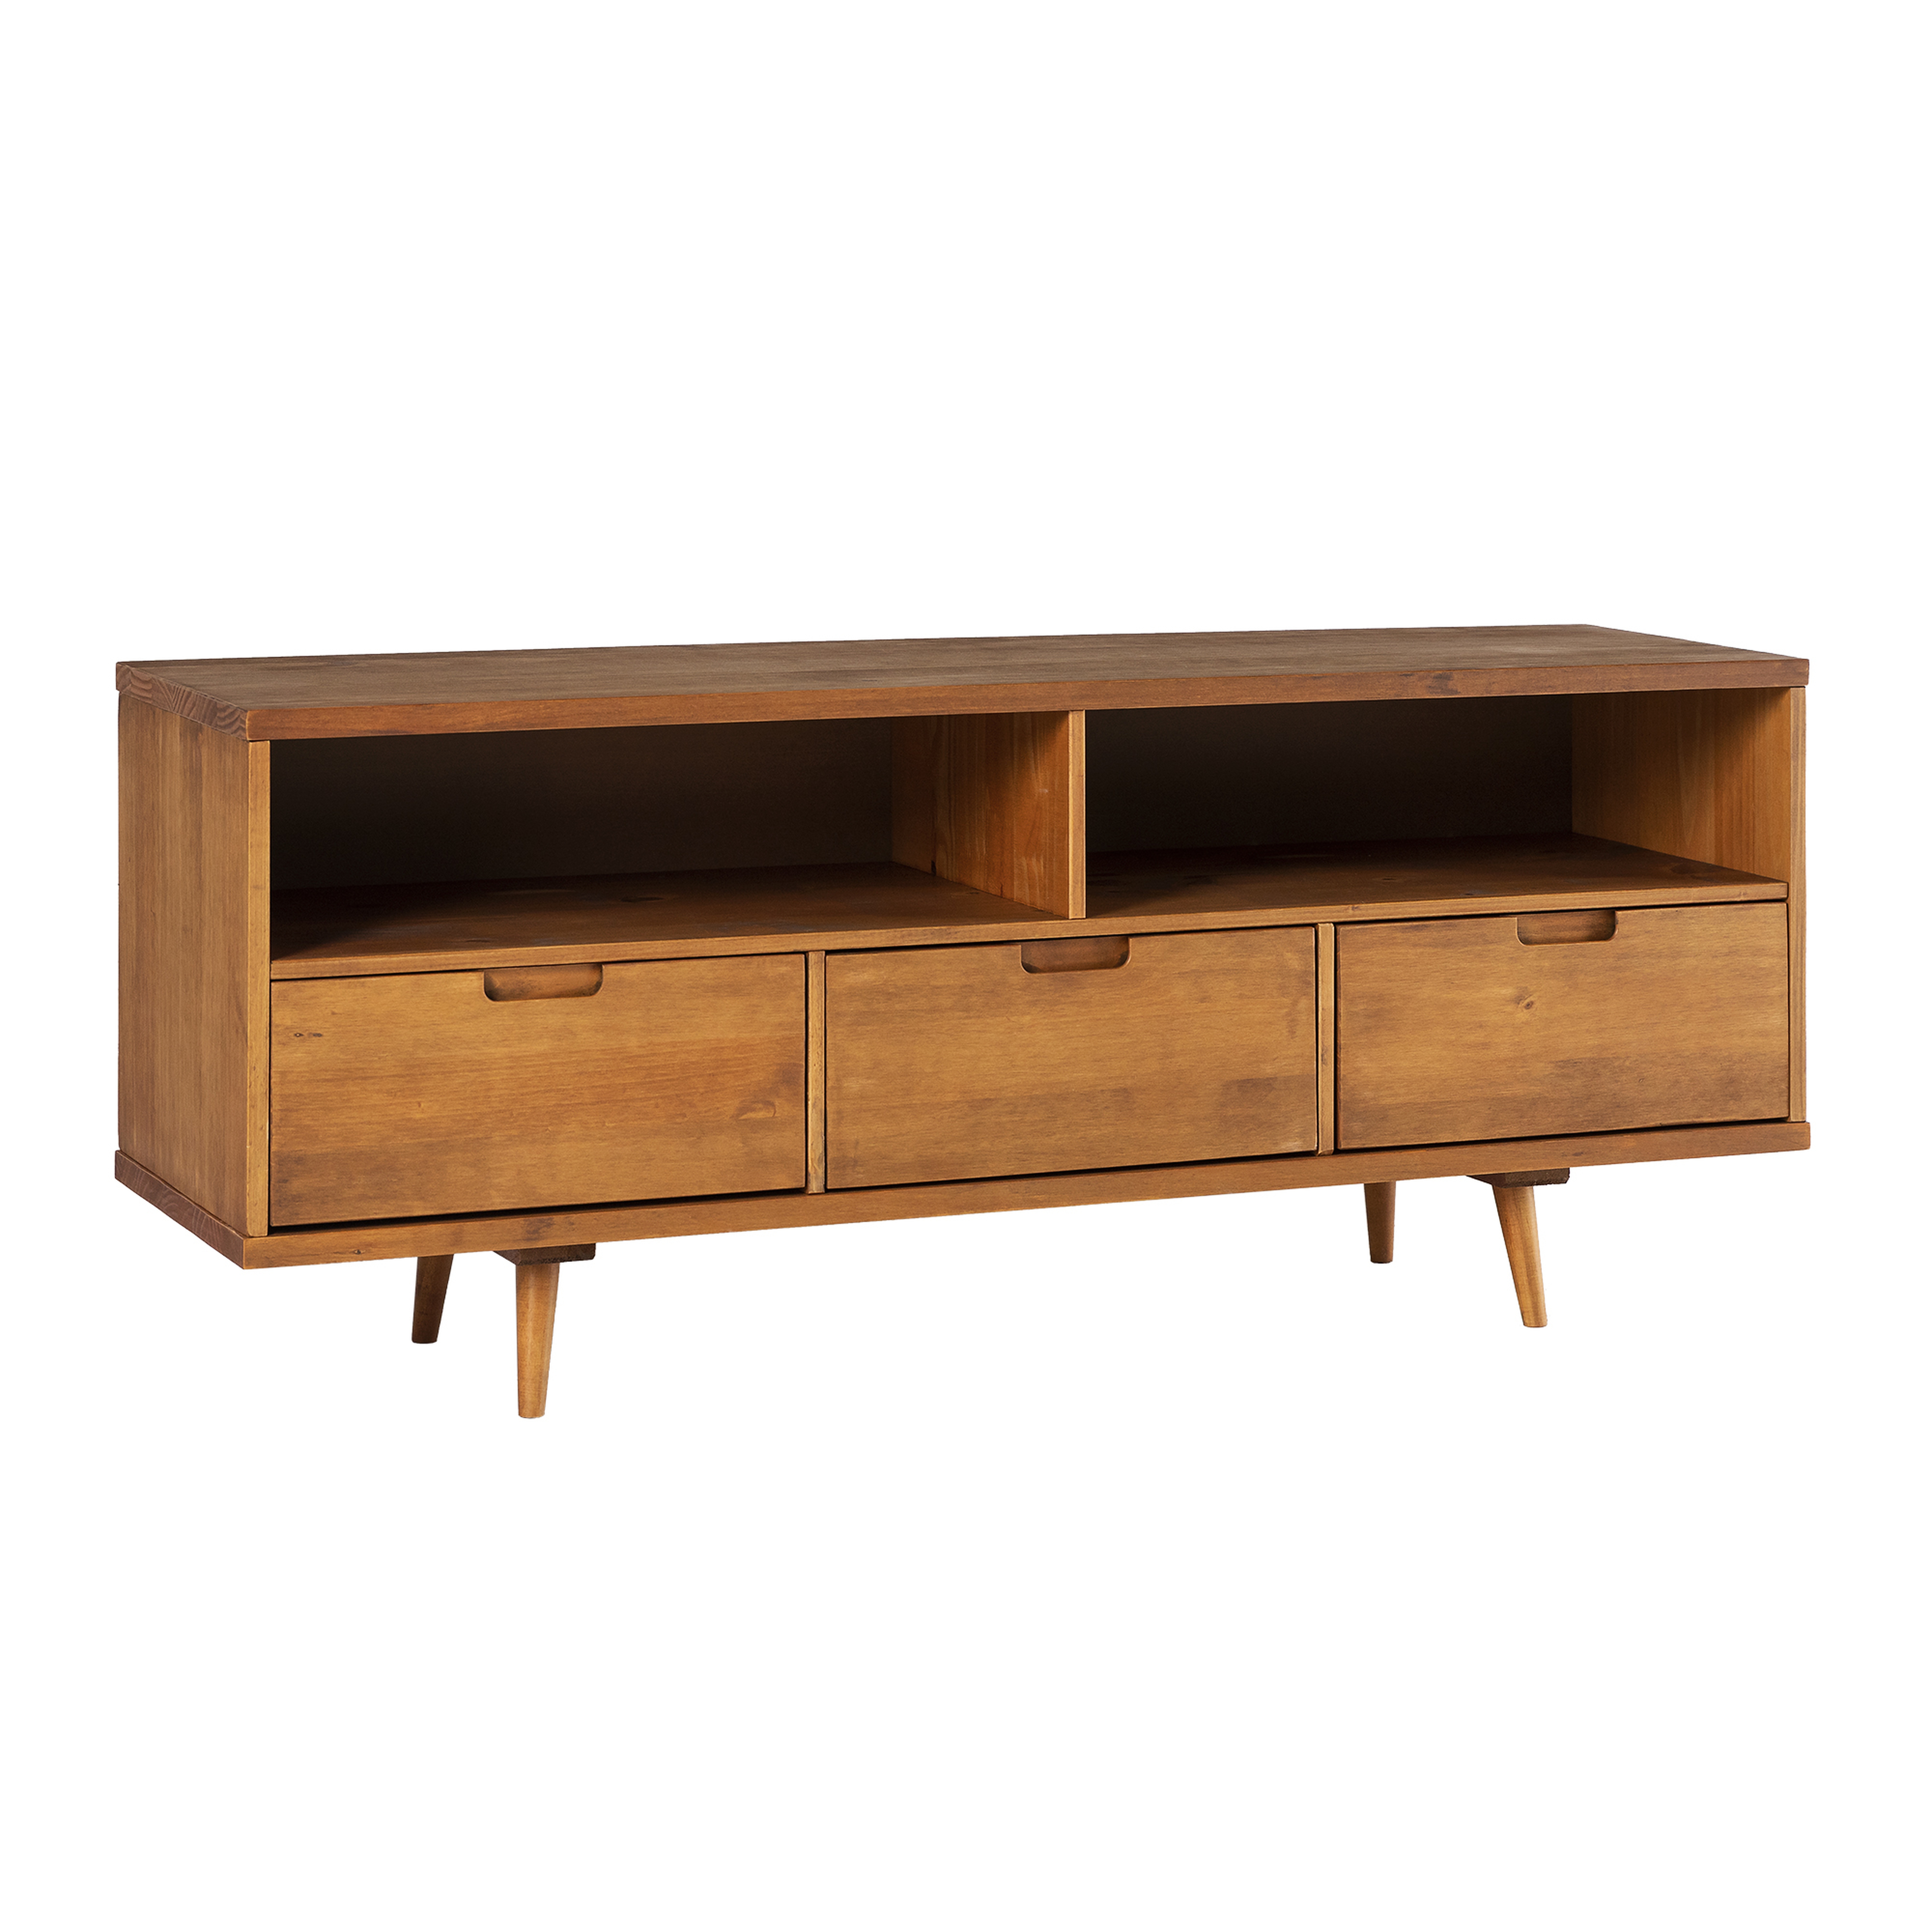 Ivy 58" 3 Drawer Mid Century Modern TV Stand - Caramel - Contour & Co.